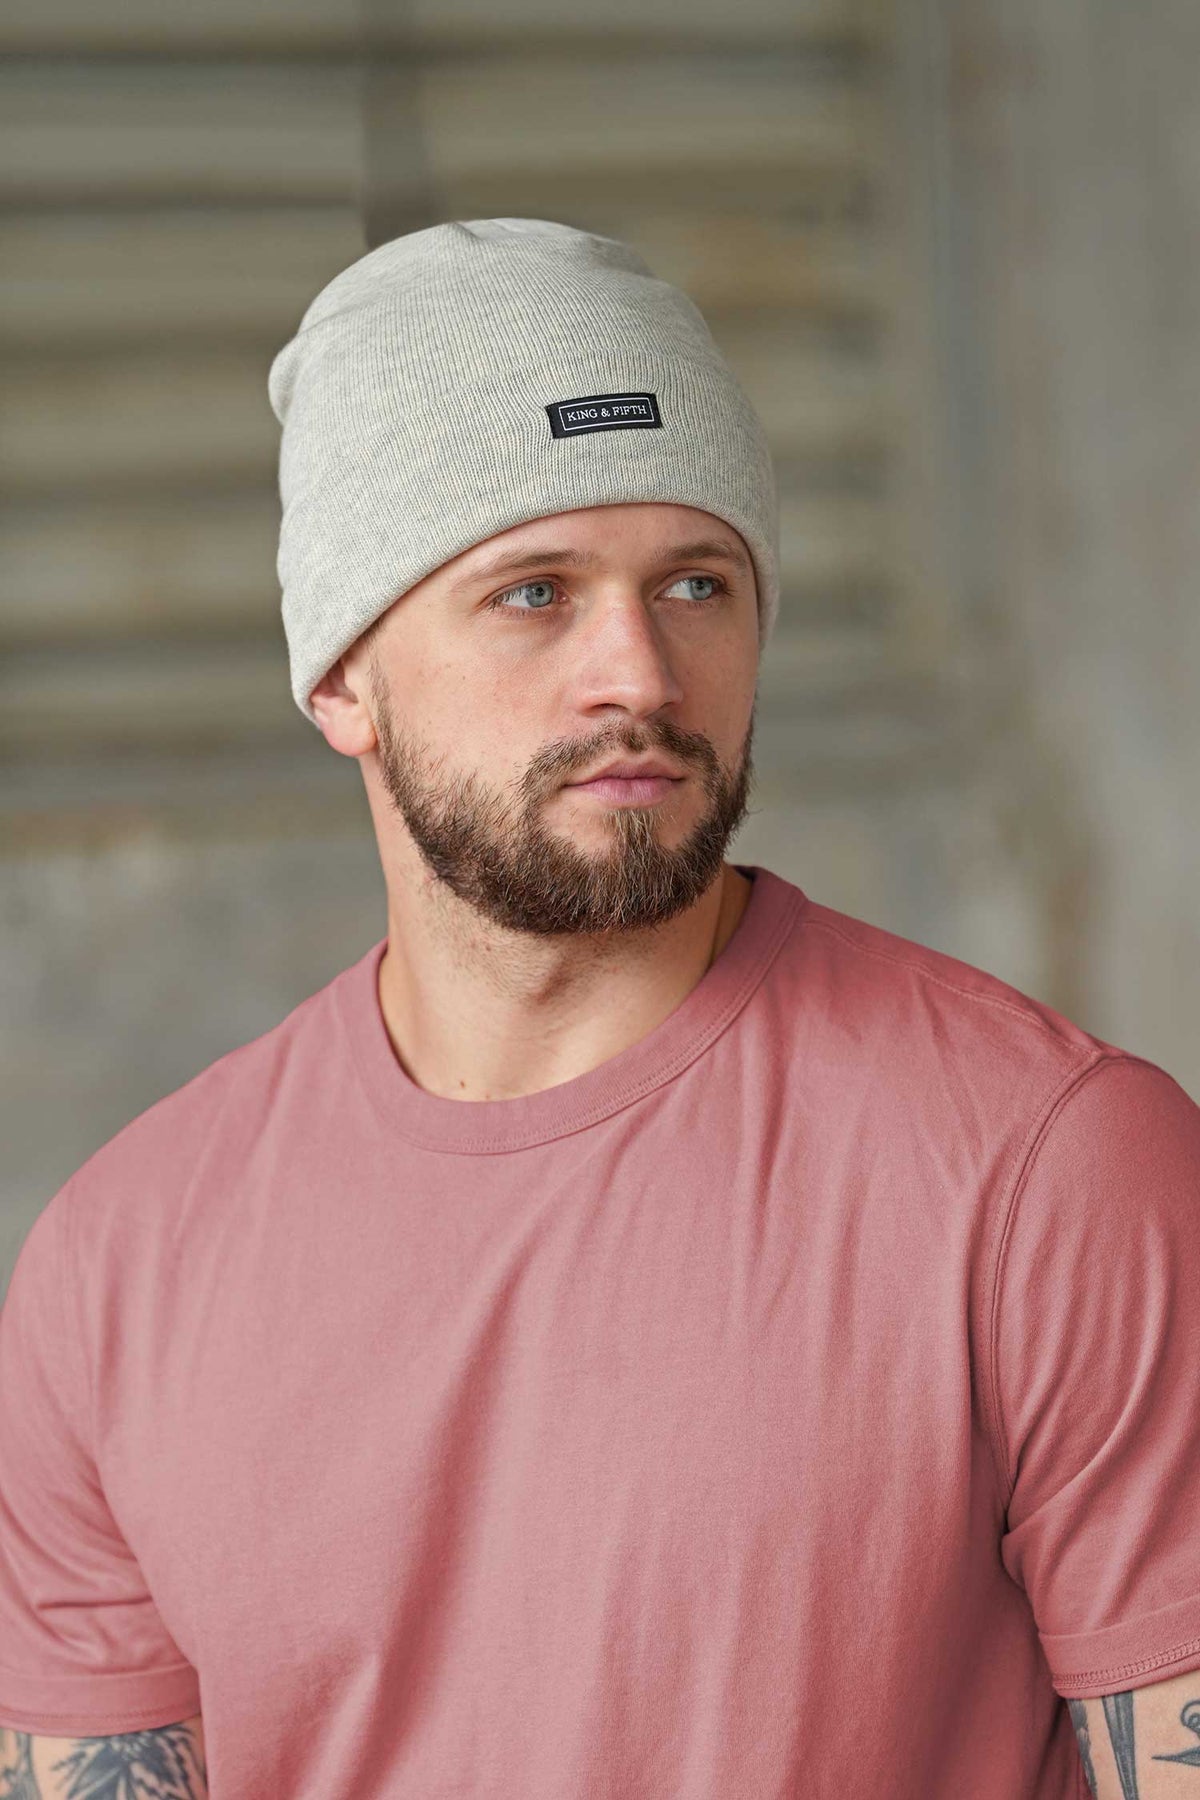 K&F Mens Summer Beanie - The Mason LW - Summer Slouchy Beanie - King and  Fifth Supply Co.